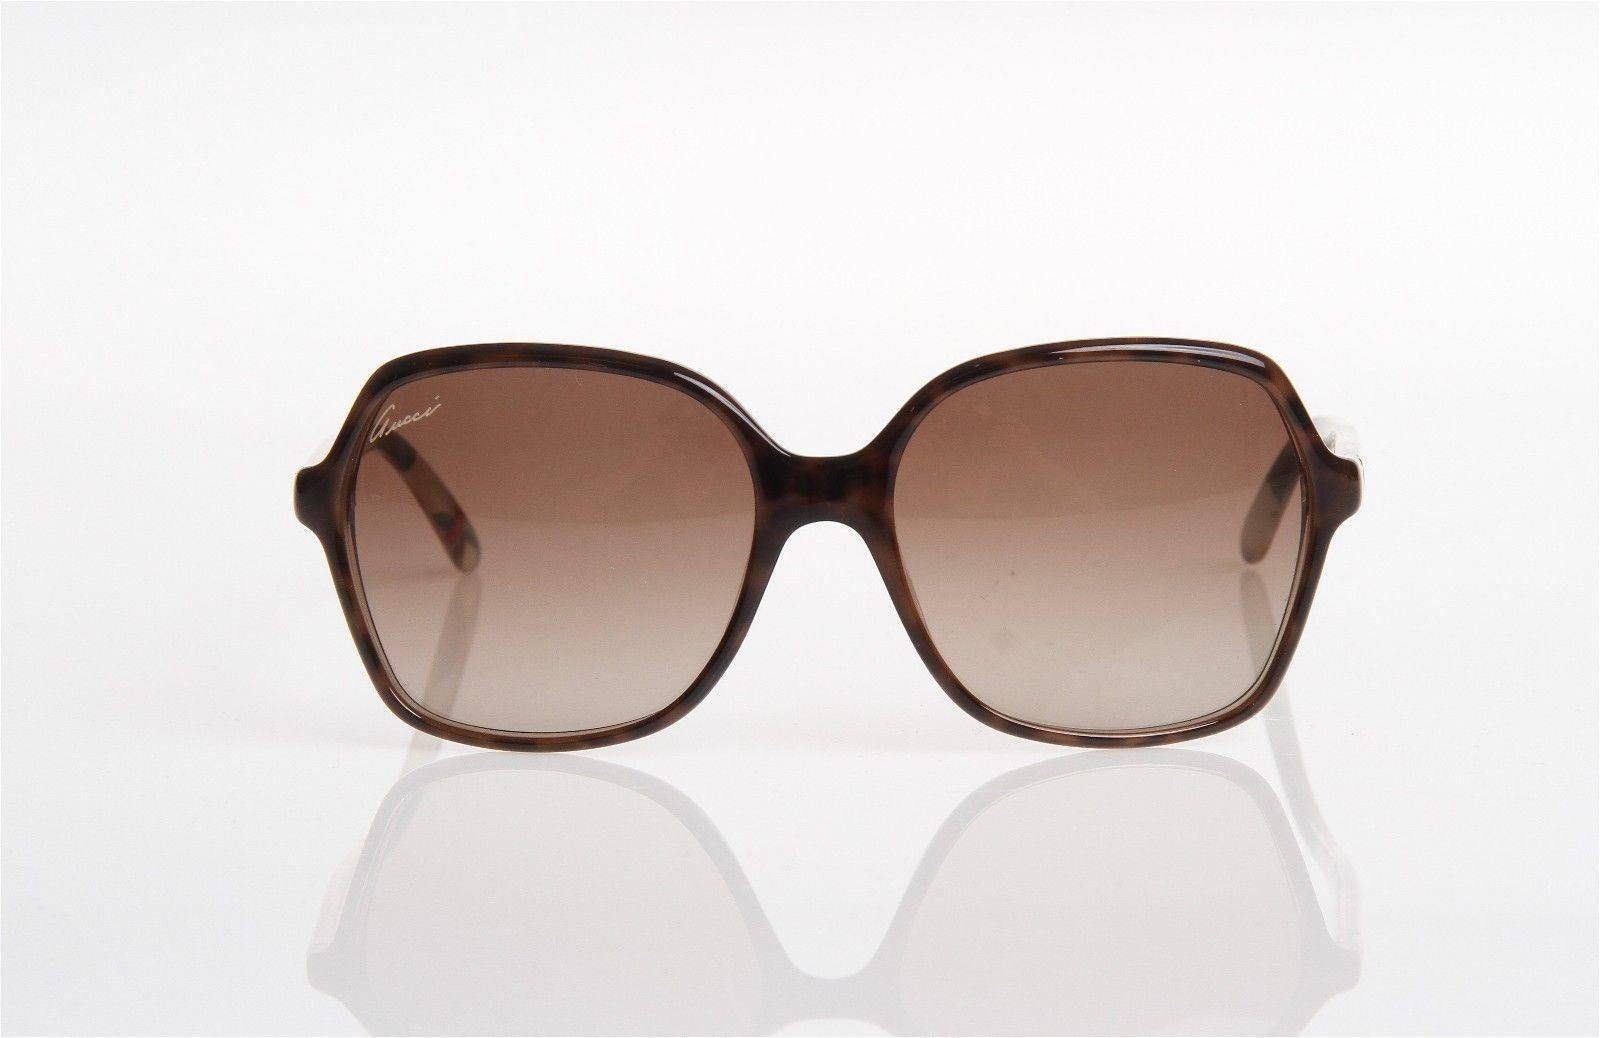 Gucci Sunglasses, Havana Flora Brown

These Gucci Sunglasses are a classic model which has been given a floral makeover for this year with the floral pattern on the inside arms taken from the Gucci's iconic flora scarf. This floral pattern visible